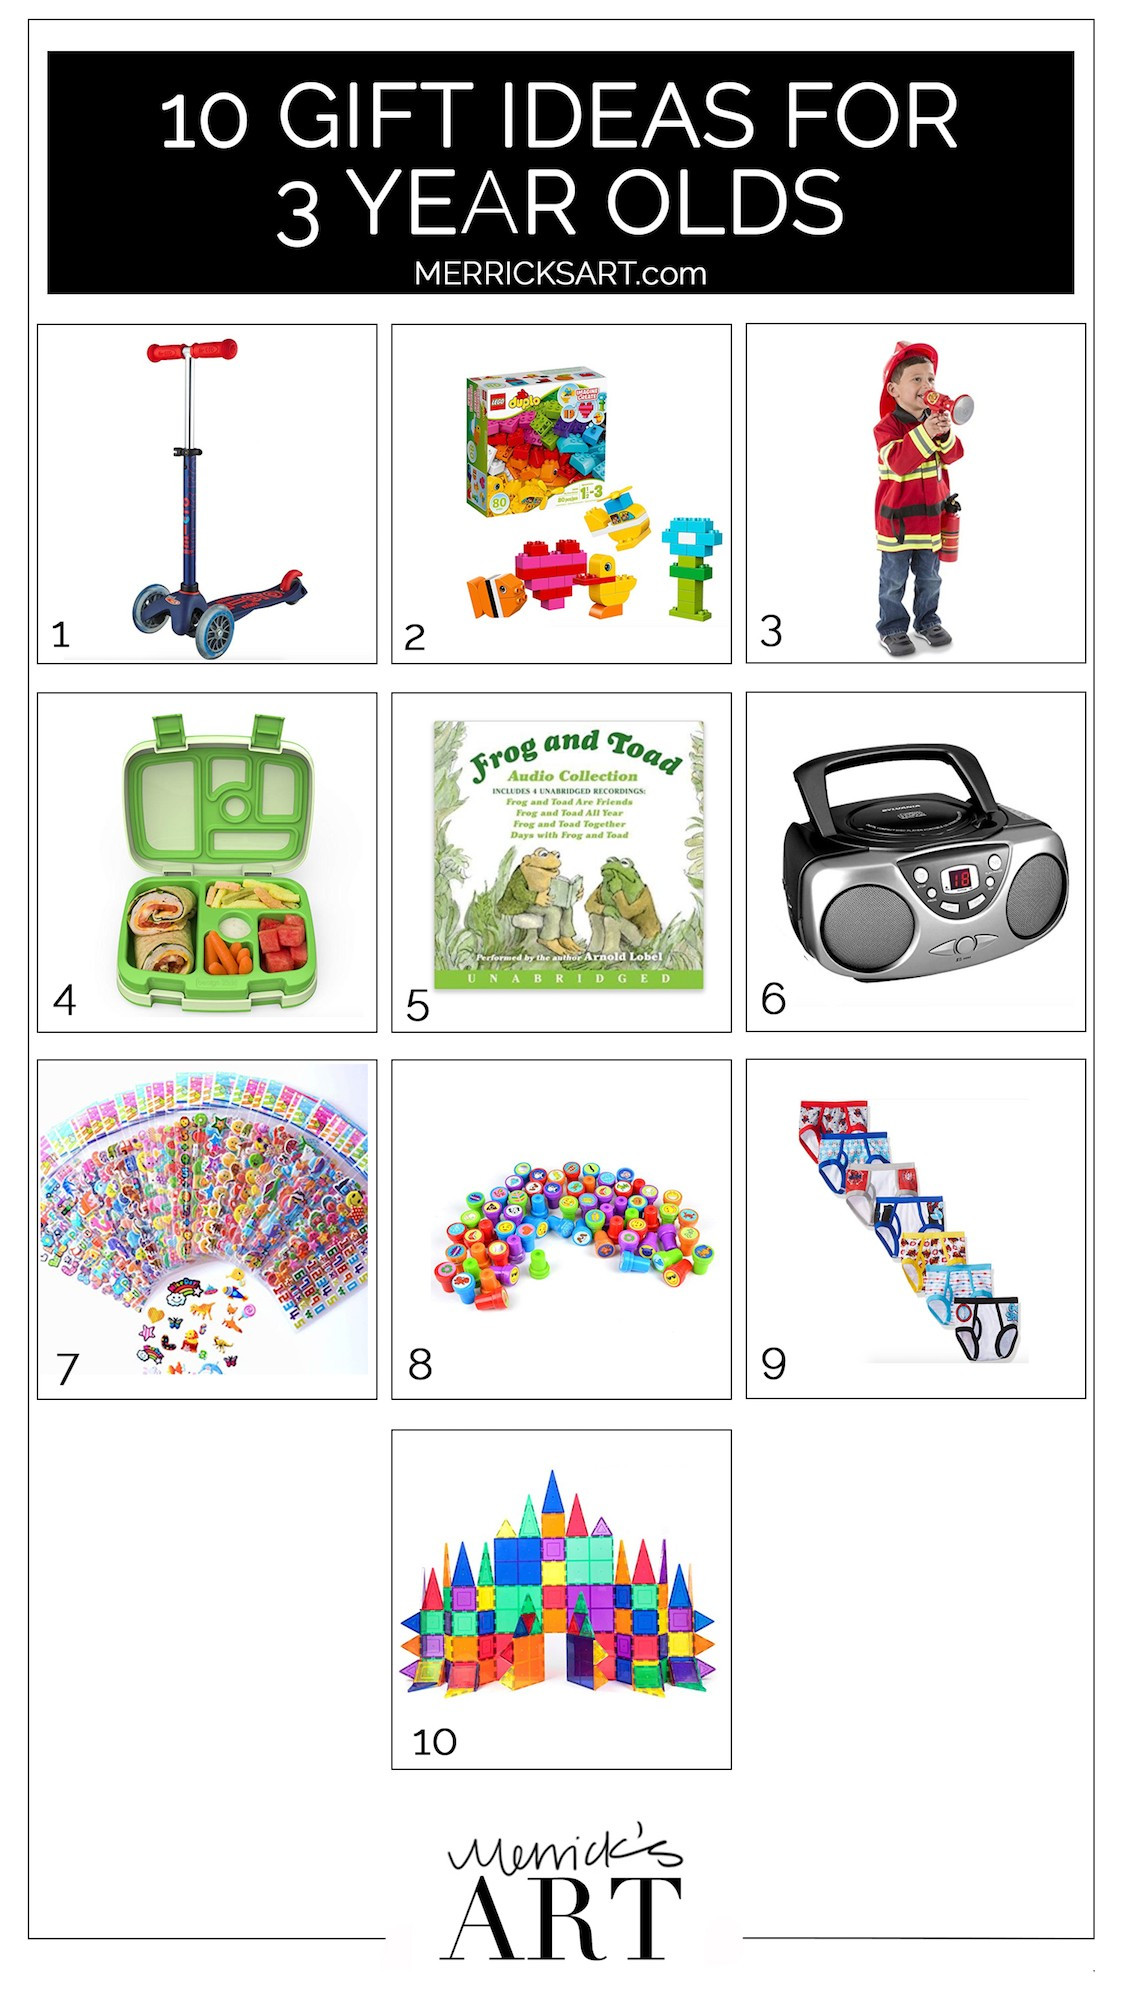 Birthday Gifts For 3 Year Old Boy
 10 Birthday Gift Ideas for a 3 Year Old Boy